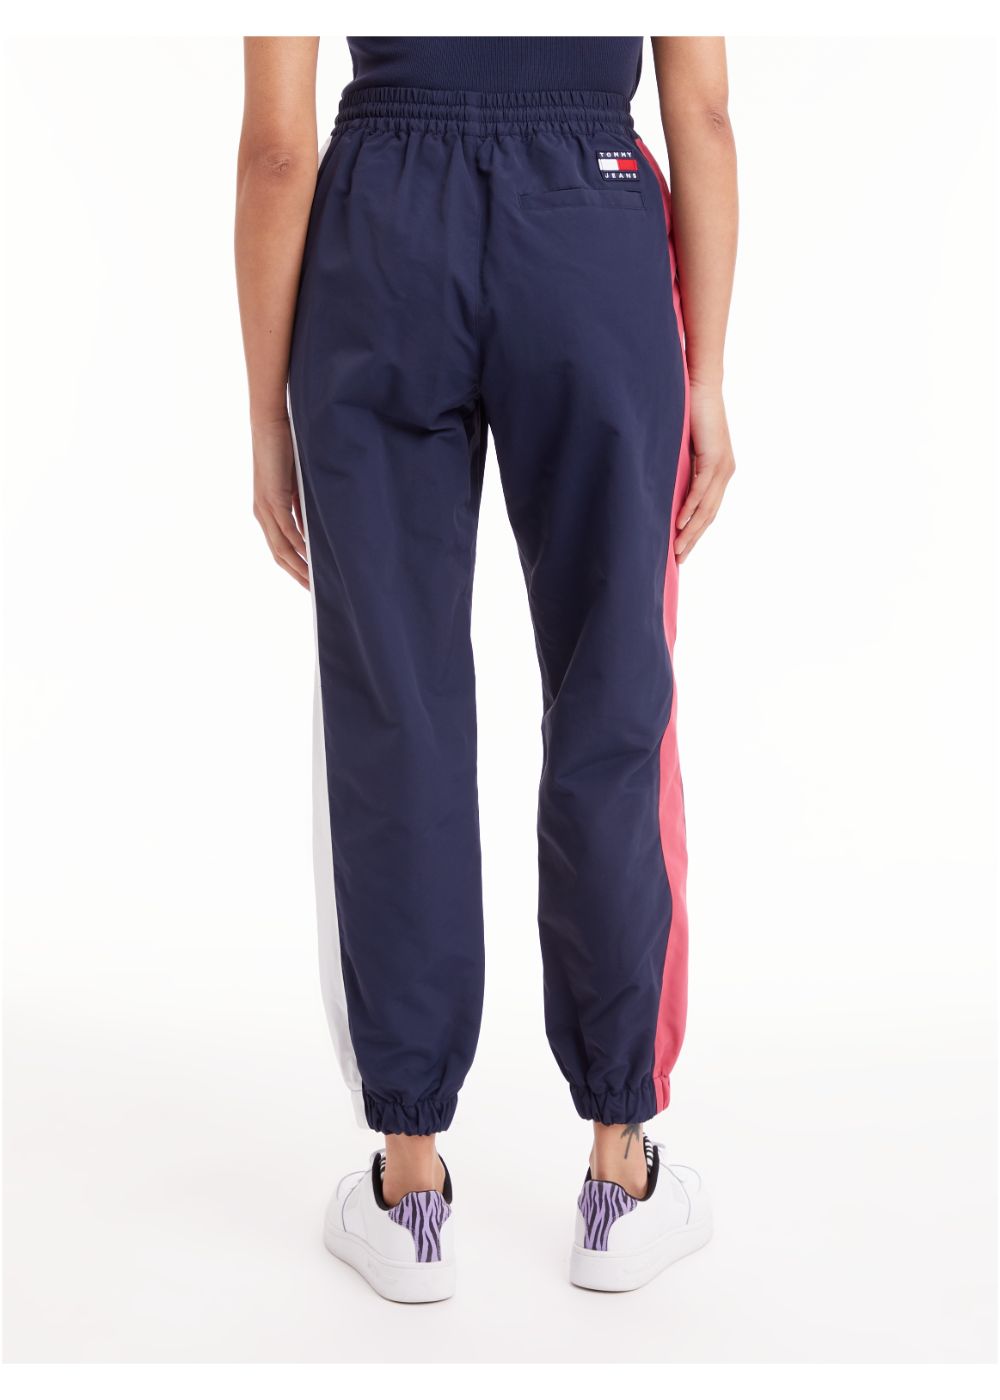 Tommy Hilfiger - houndstooth sweatpants online tapered - women dstore 